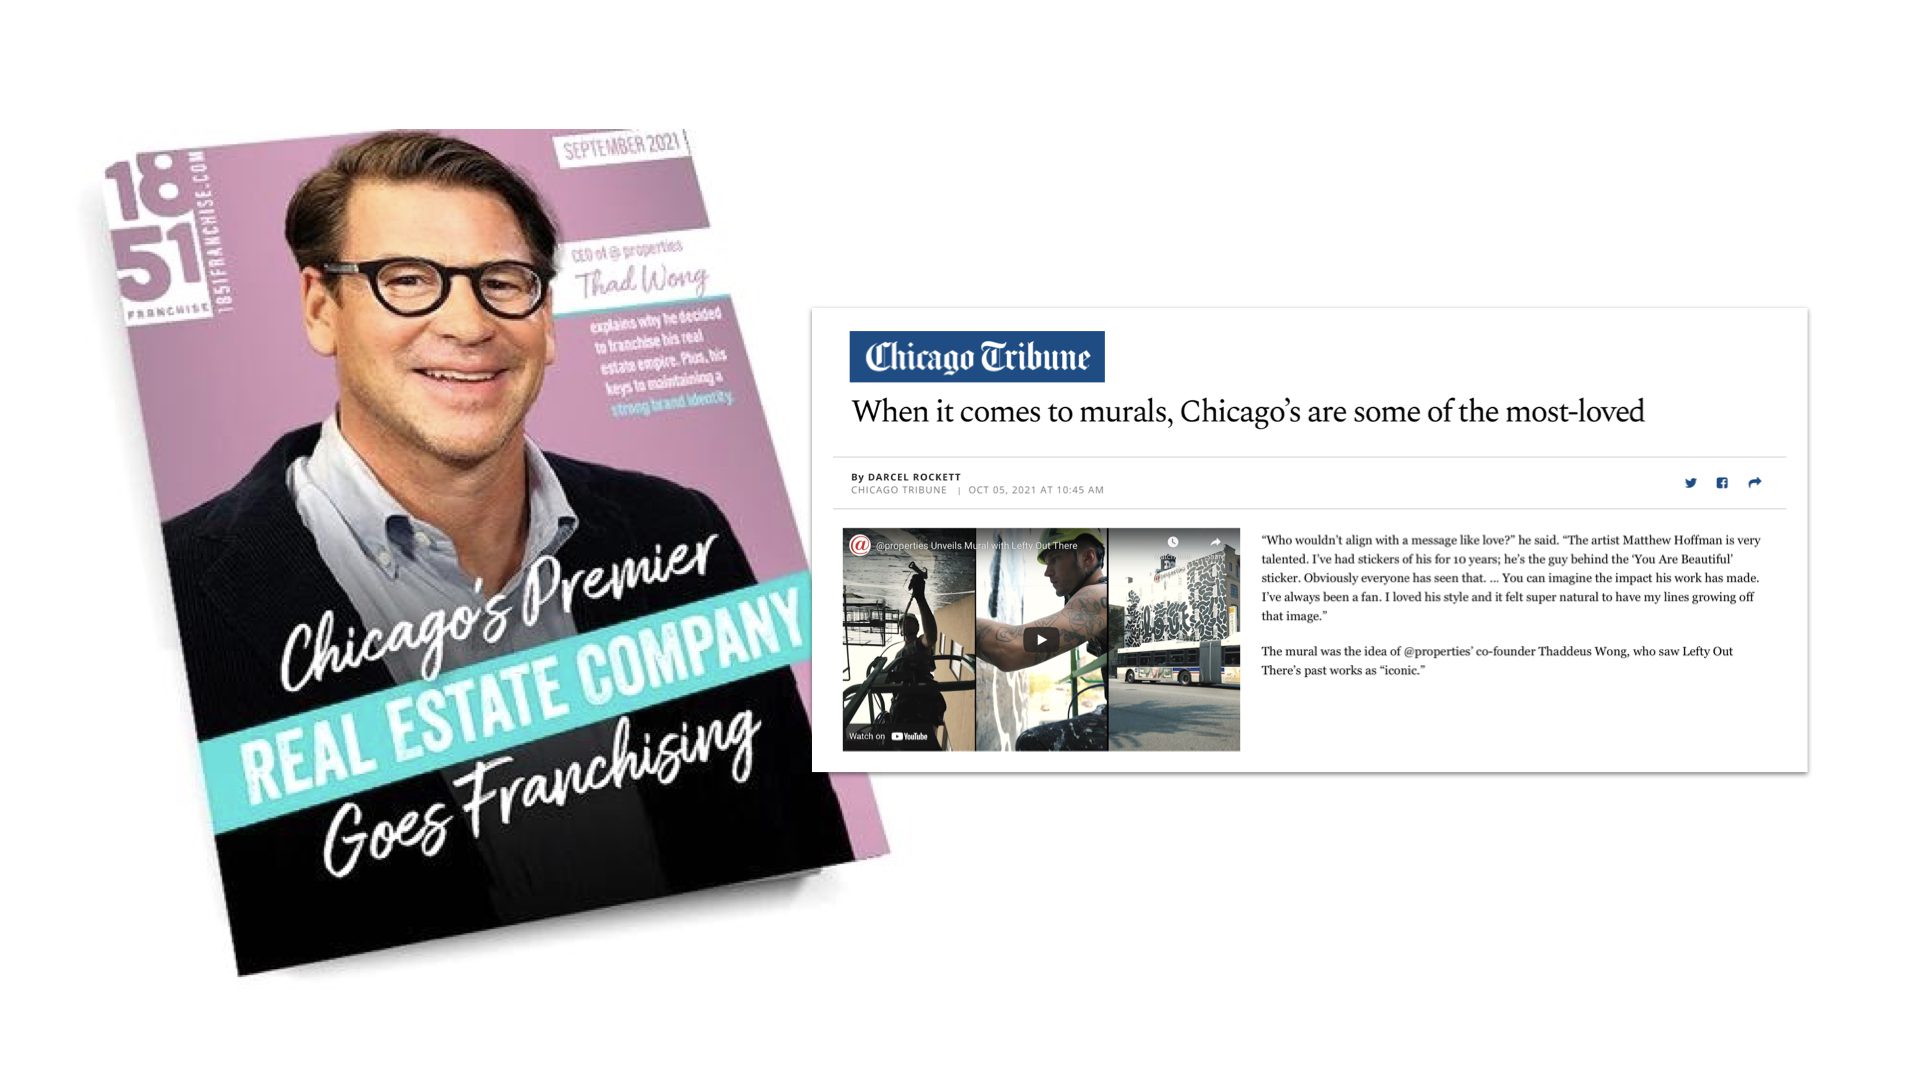 @properties - Client Story - Thad Wong Features